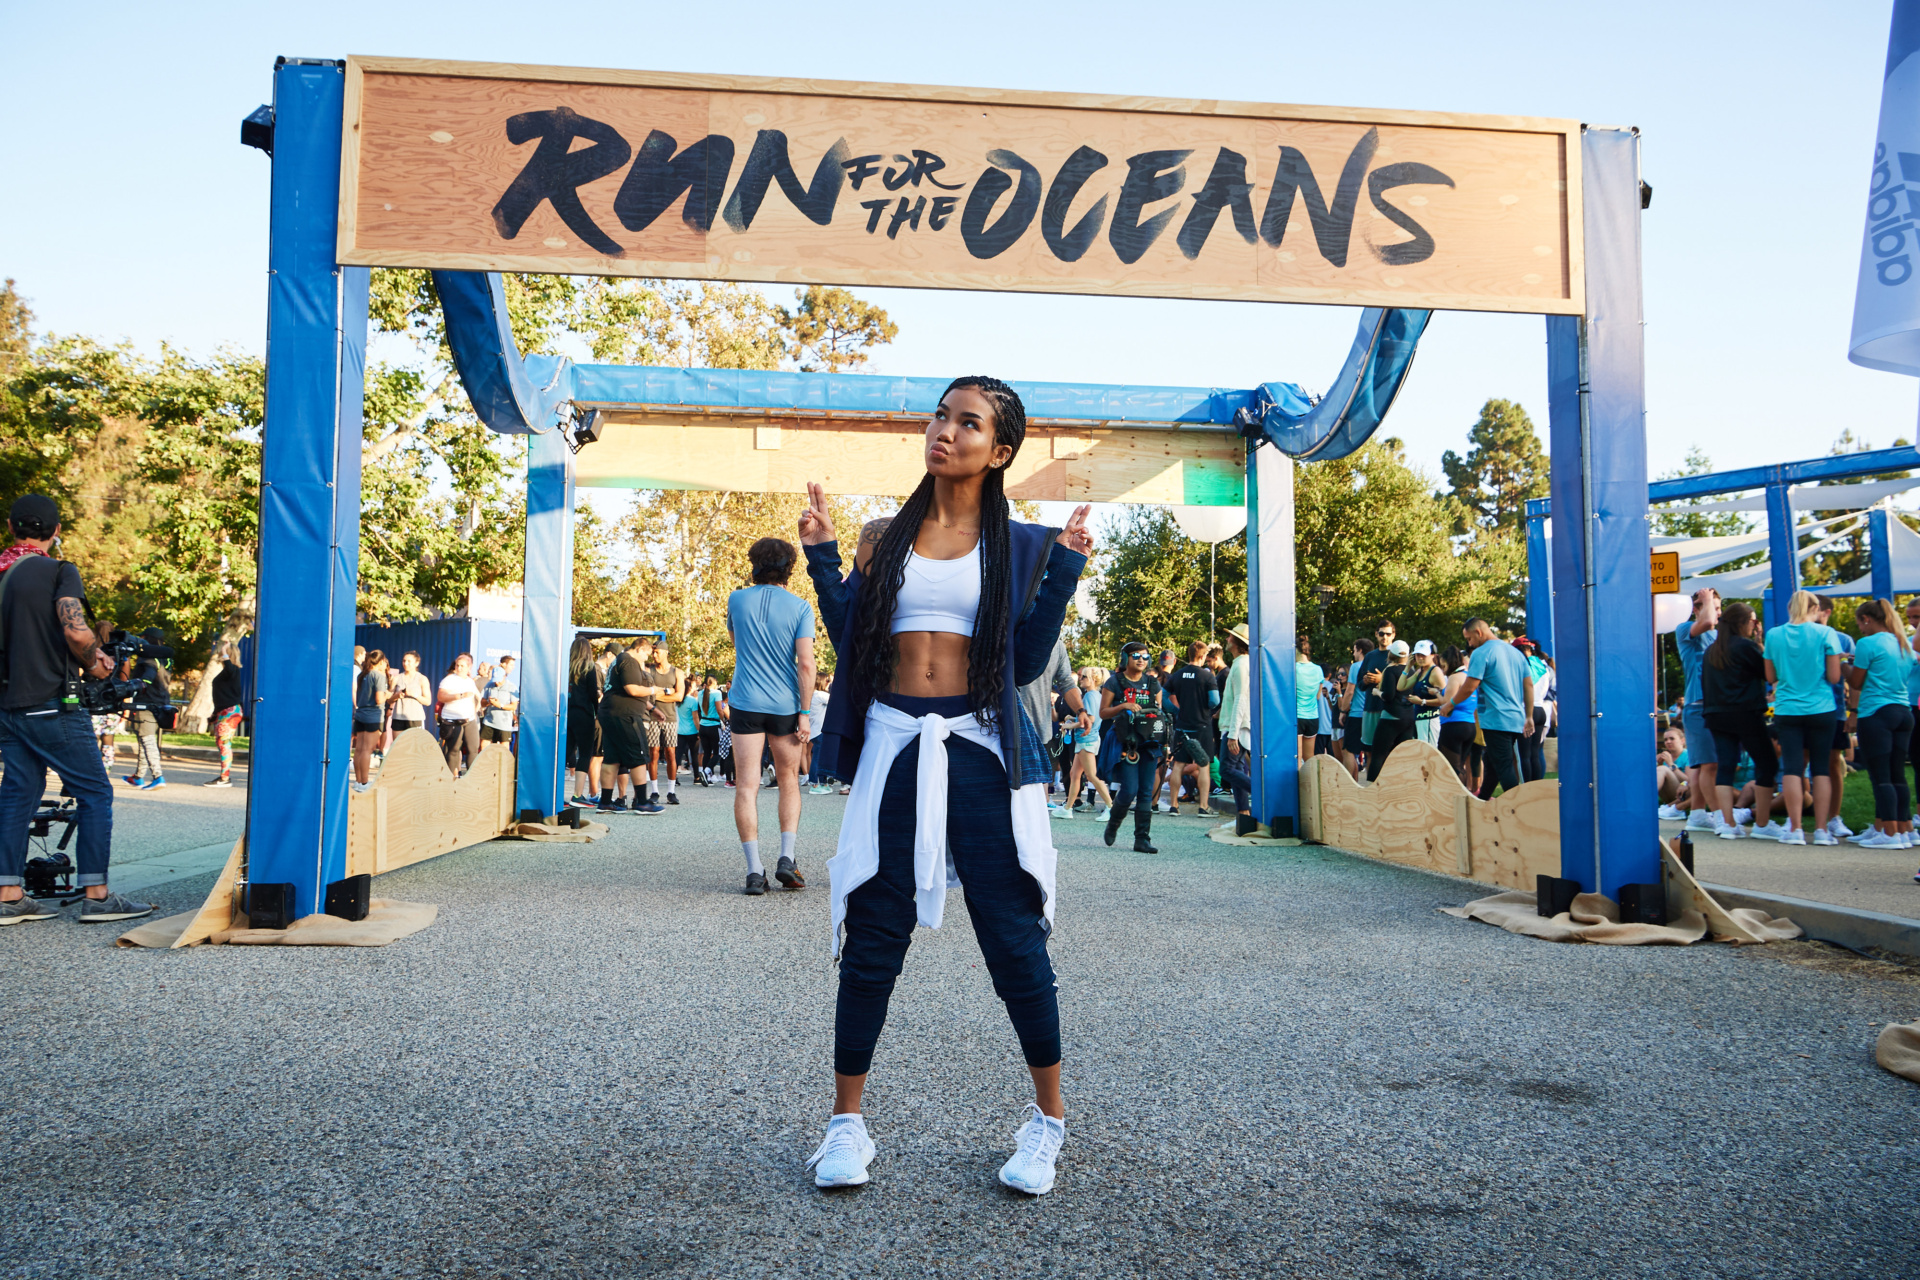 parley adidas run for the oceans